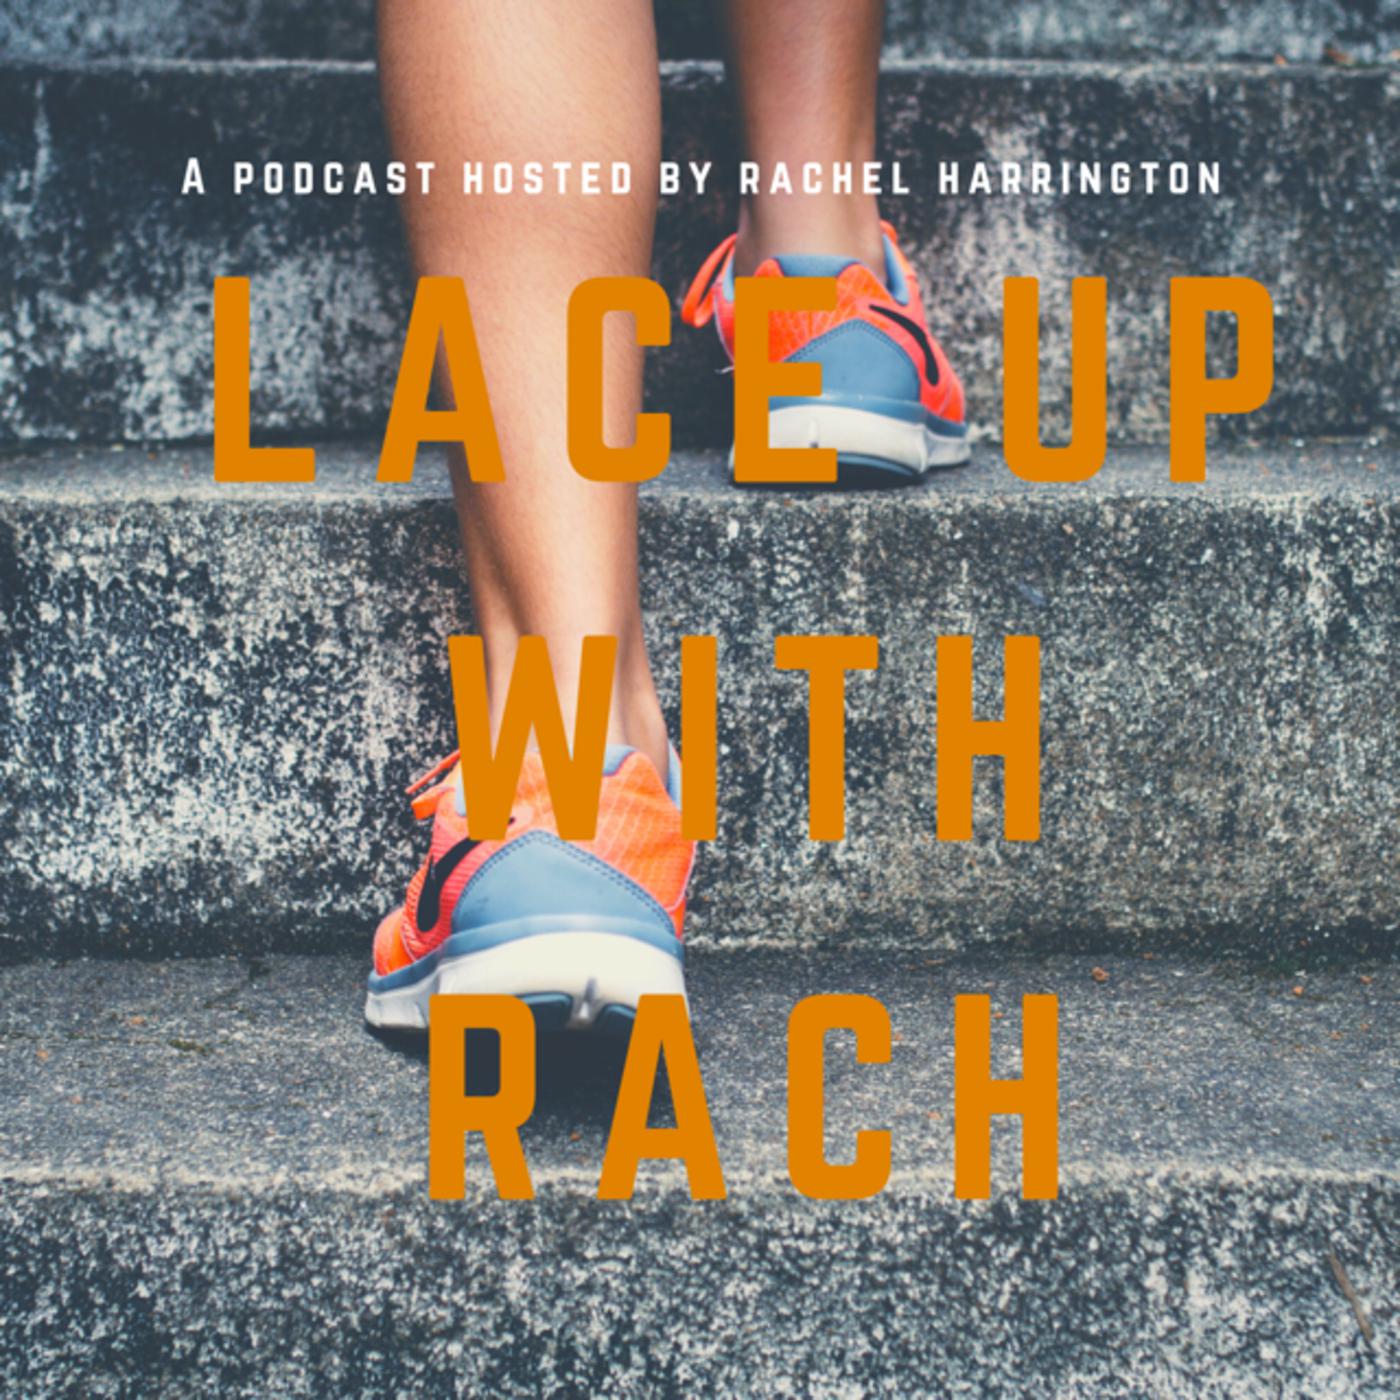 Lace up with Rach